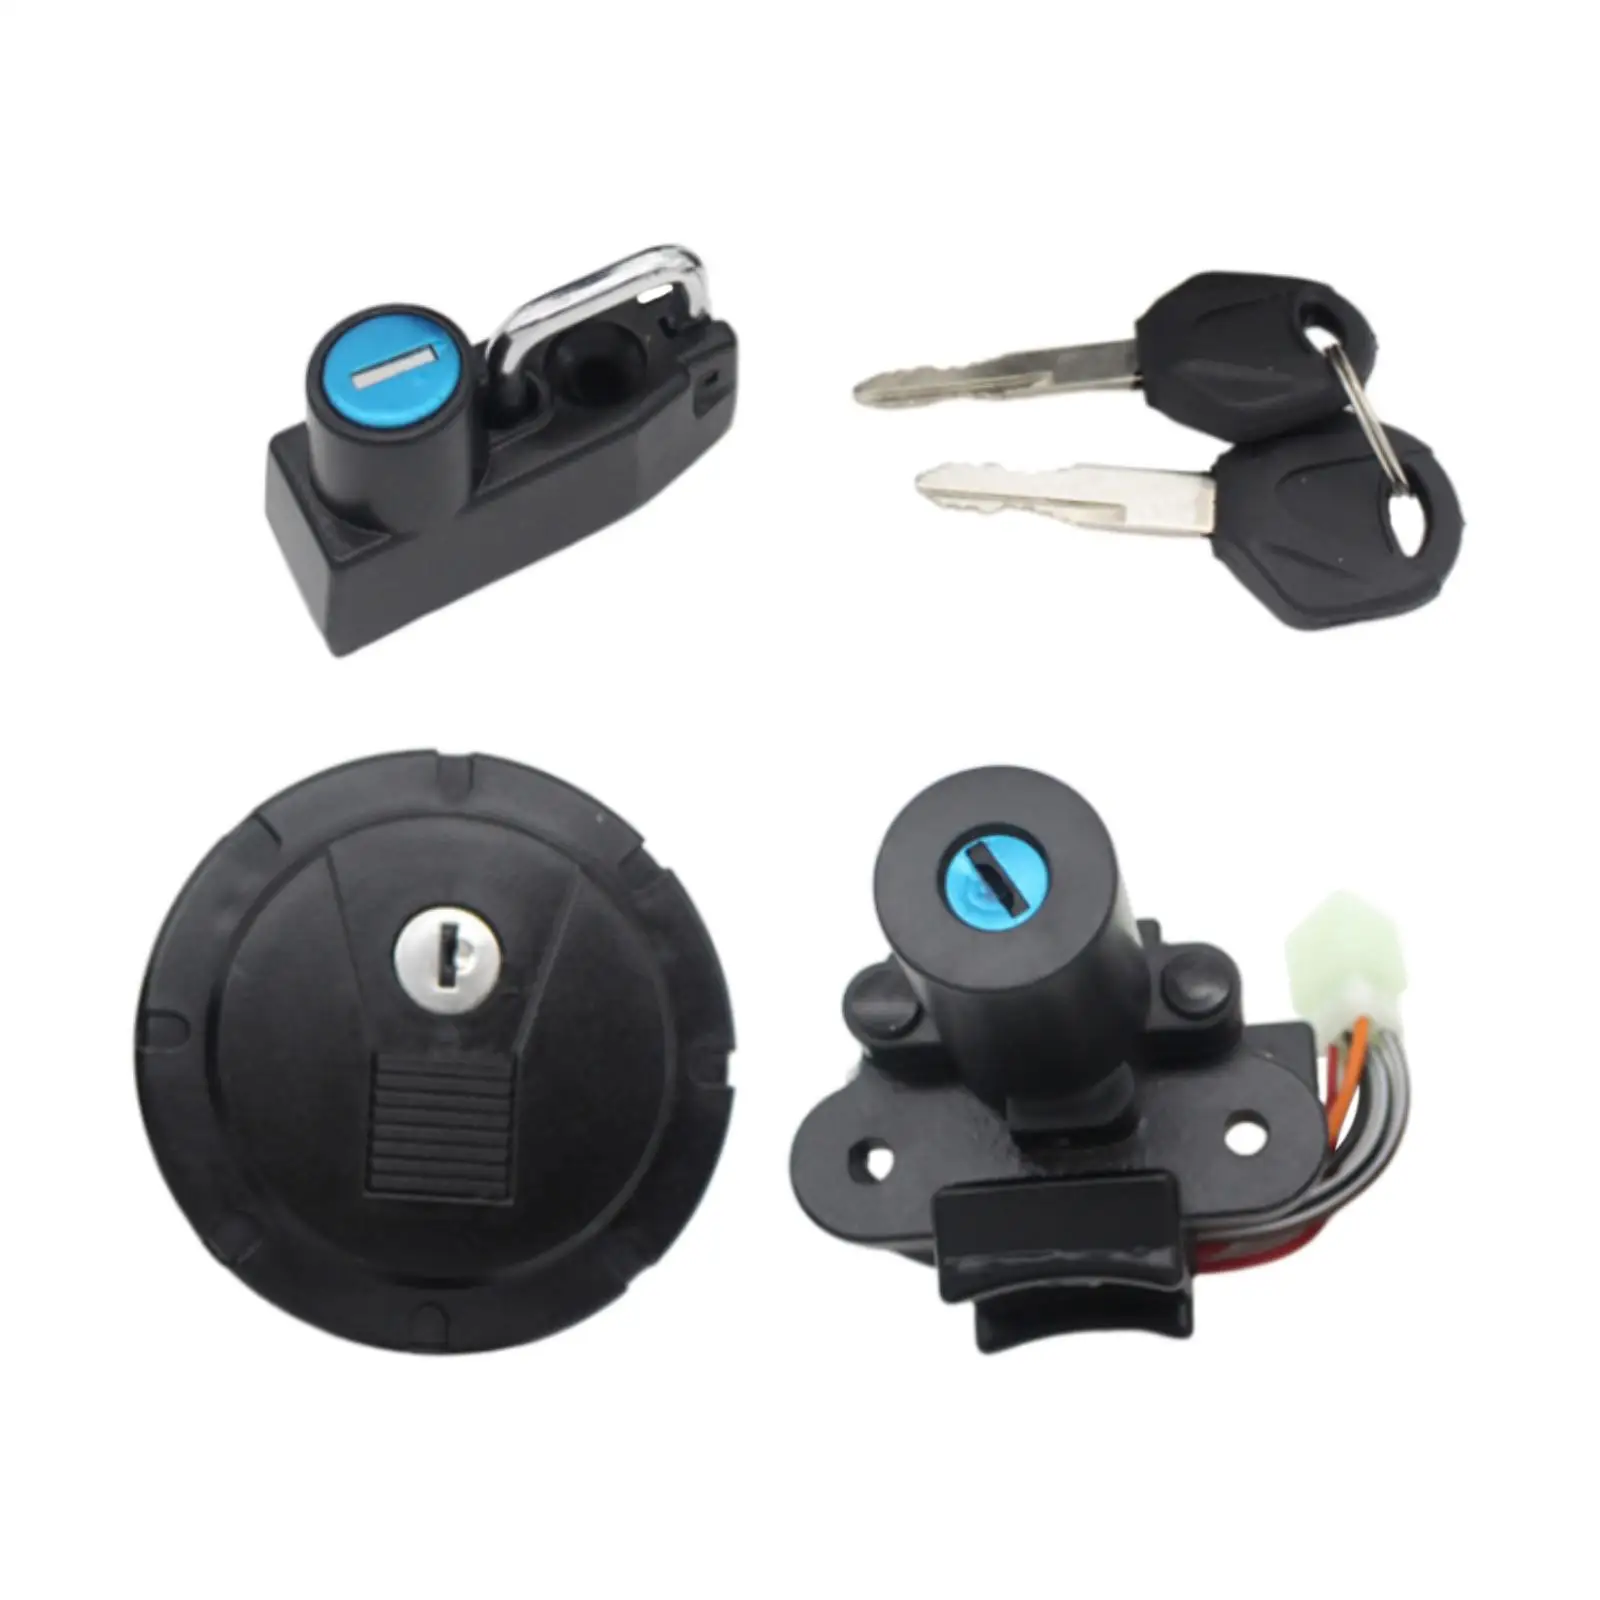 Motorcycle Fuel Tank Cover Lock Kit Accessories for Kawasaki Klx Kl 250 Kmx125 Kmx250 Vehicle Repair Parts Easily Install